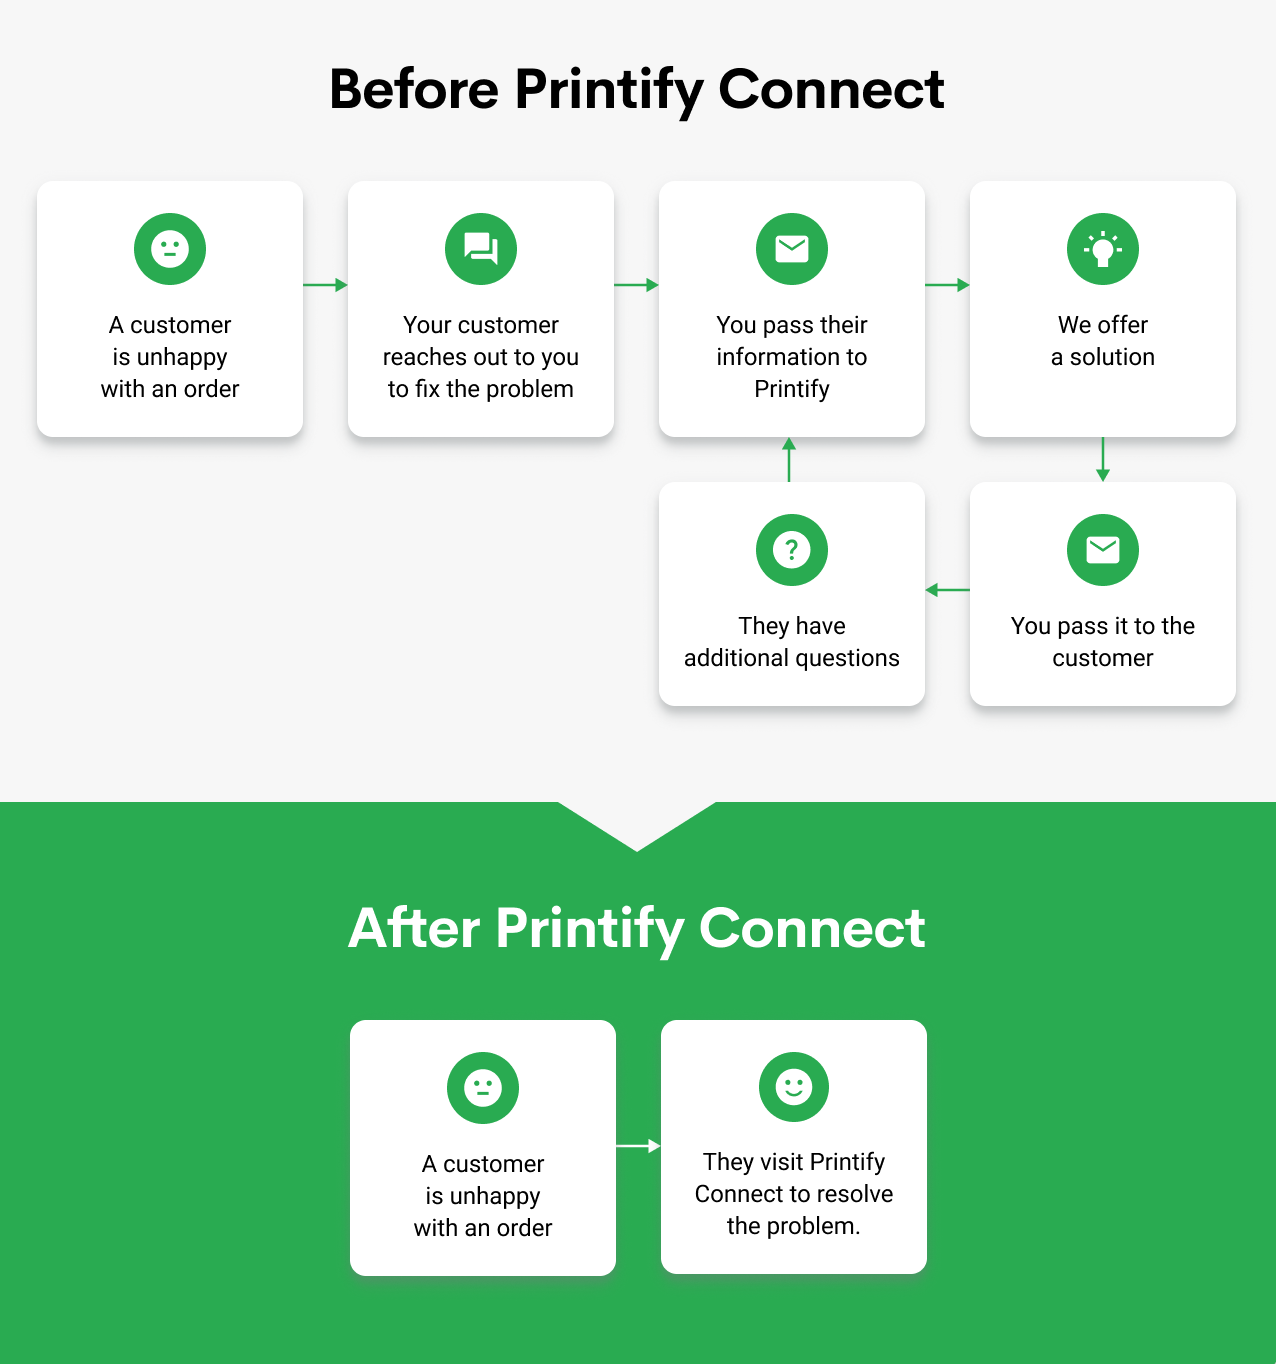 A scheme of long sequence of events Before Printify Connect contrasted with just two events after Printify Connect, where: 1. A customer is unhappy with an order 2. They visit Printify Connect to resolve the problem.